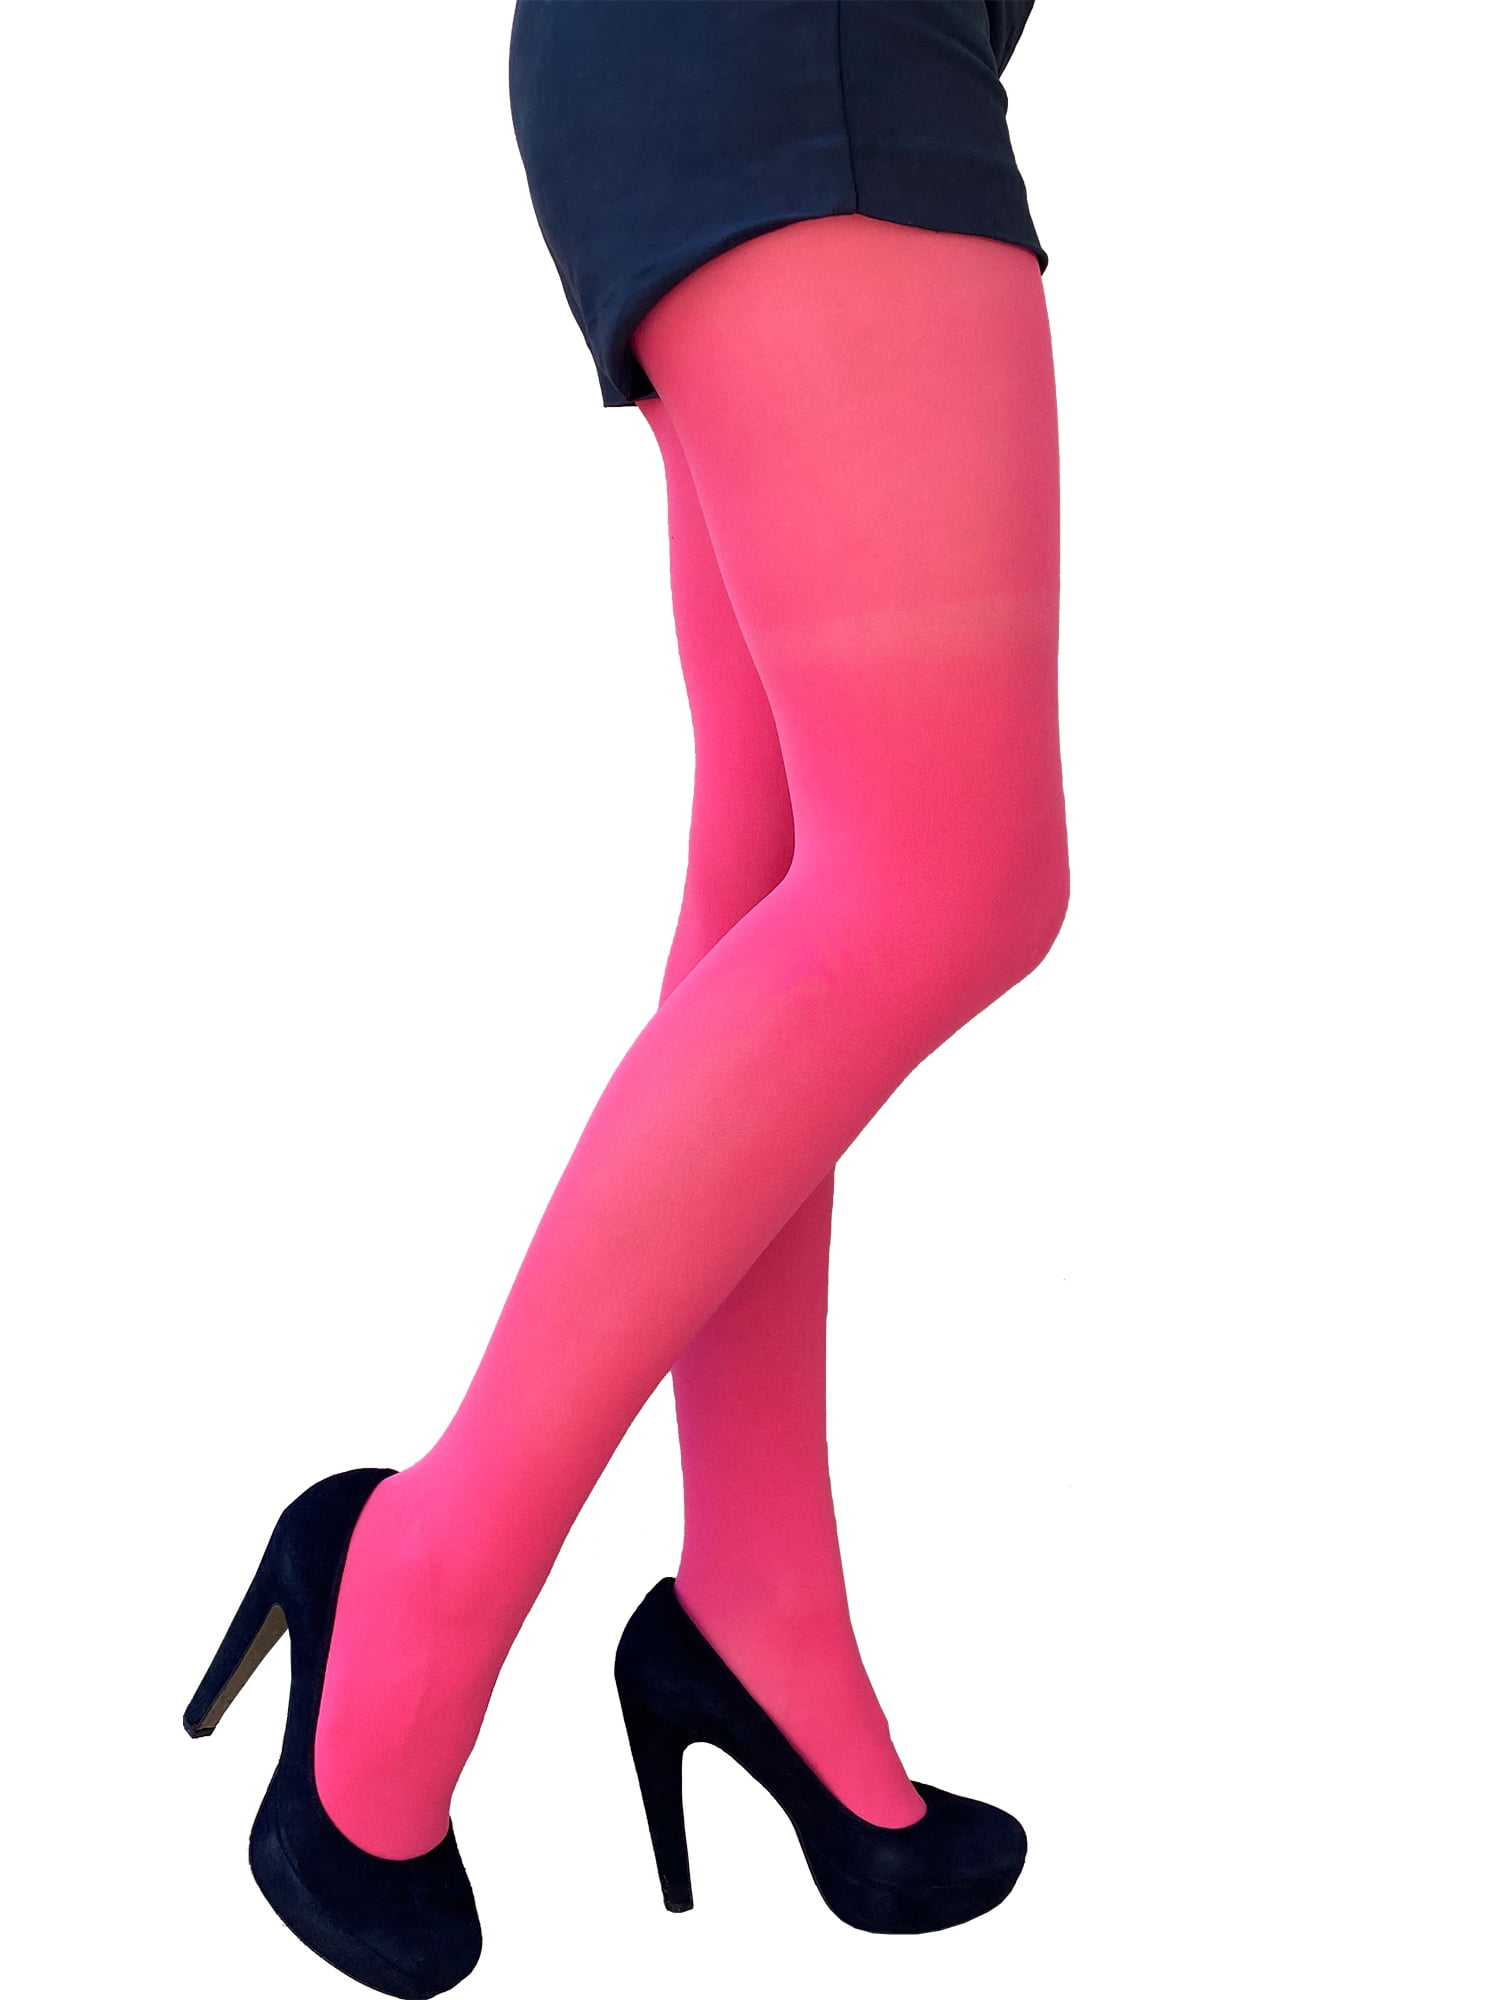 Coral Pink Opaque Full Footed Tights, Pantyhose for Women